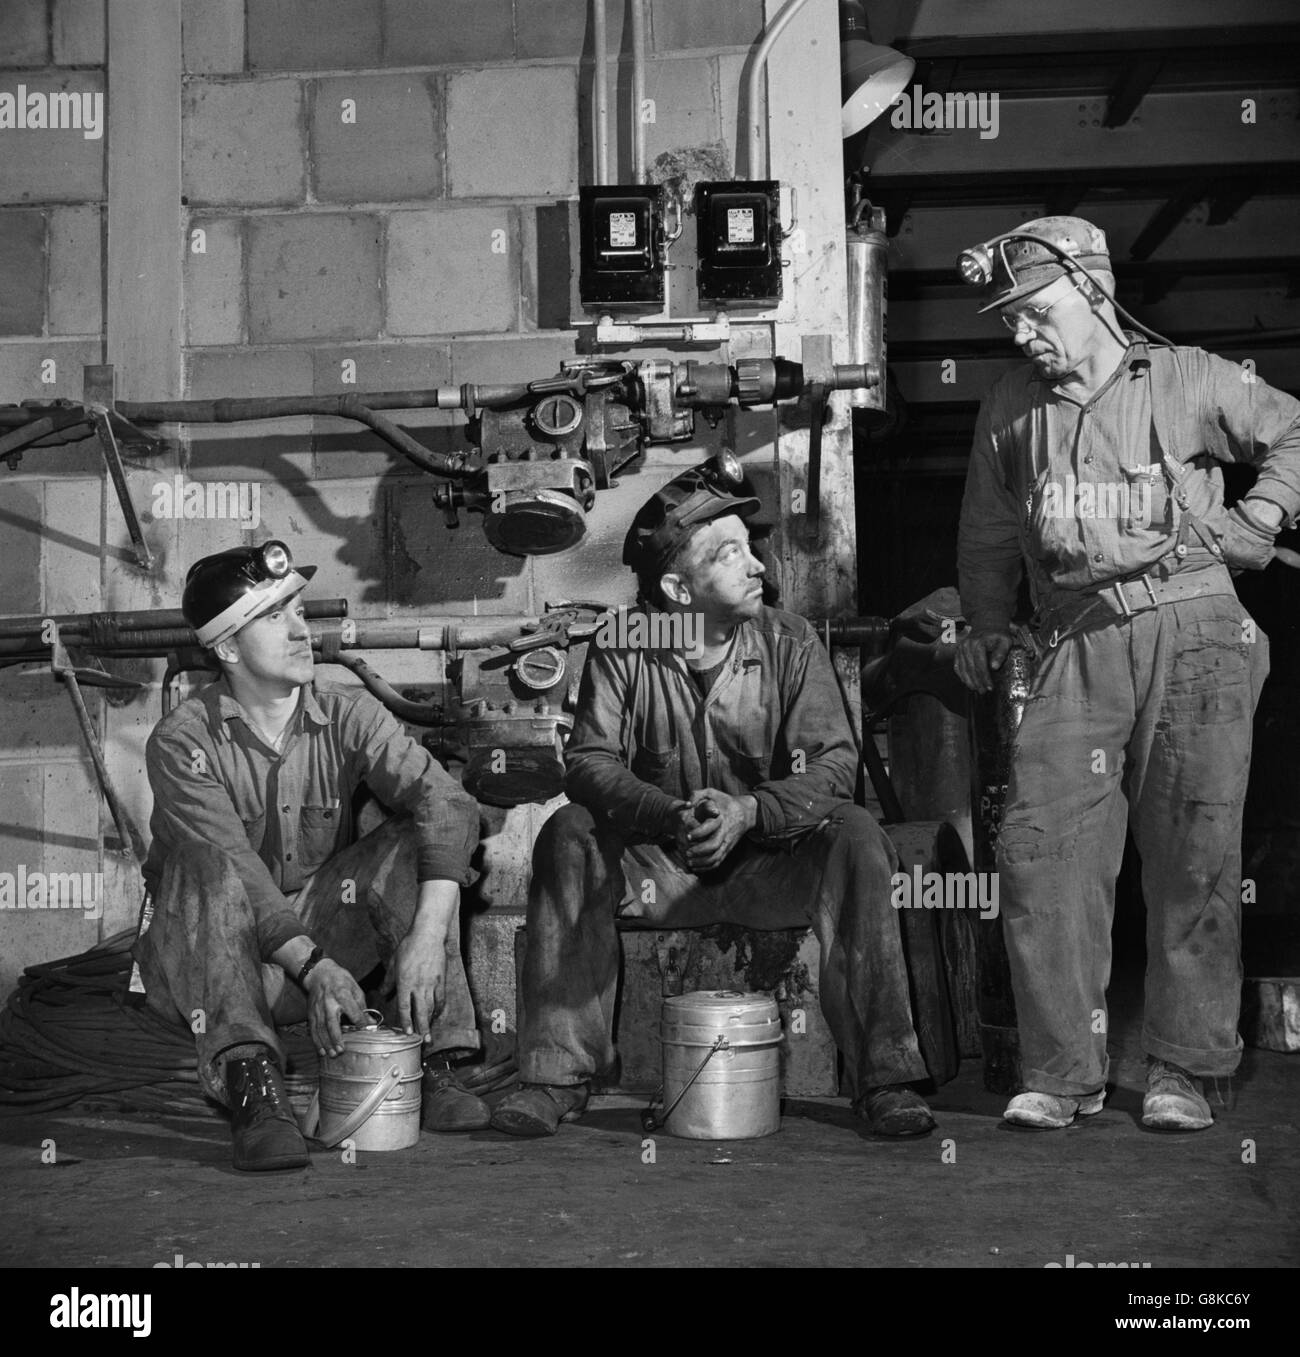 Miners Having Lunch in Machine Shop, Montour No. 4 Mine of Pittsburgh Coal Company, Pittsburgh, Pennsylvania, USA, John Collier for Office of War Information, November 1942 Stock Photo